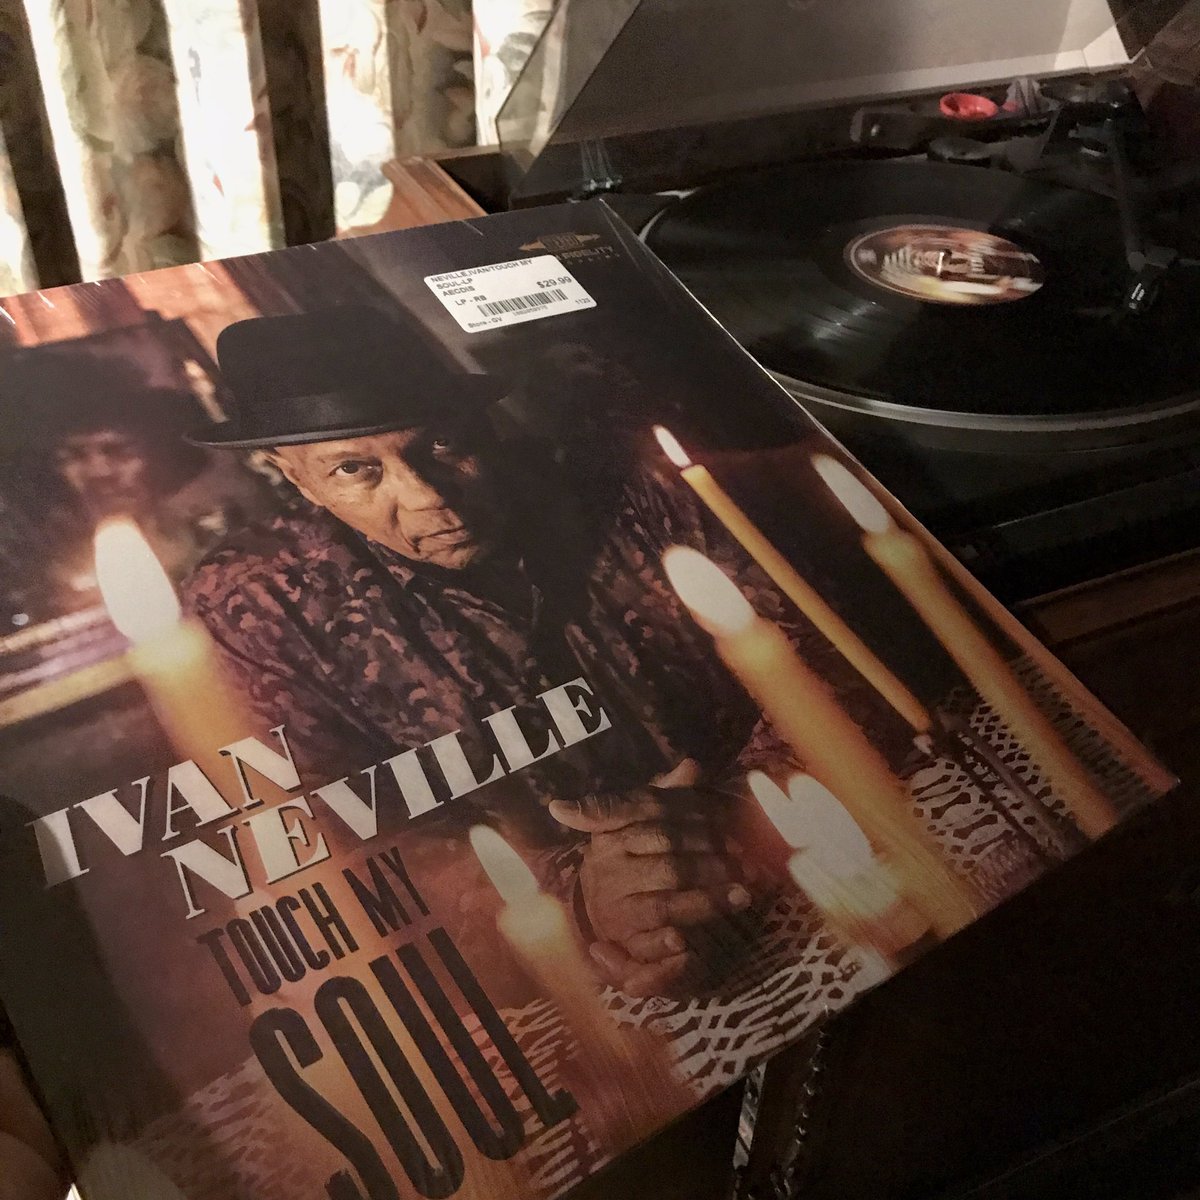 Currently spinning the new @IvanNeville record, here in #CookieLadysWorld. Really wishing someone (“cough, @FirstAvenue, cough!”) would book @dumpstaphunk up here, too. C’mon; maybe a co-book with @TheCedar or @AmsterdamBar651 ? #infunkwetrust